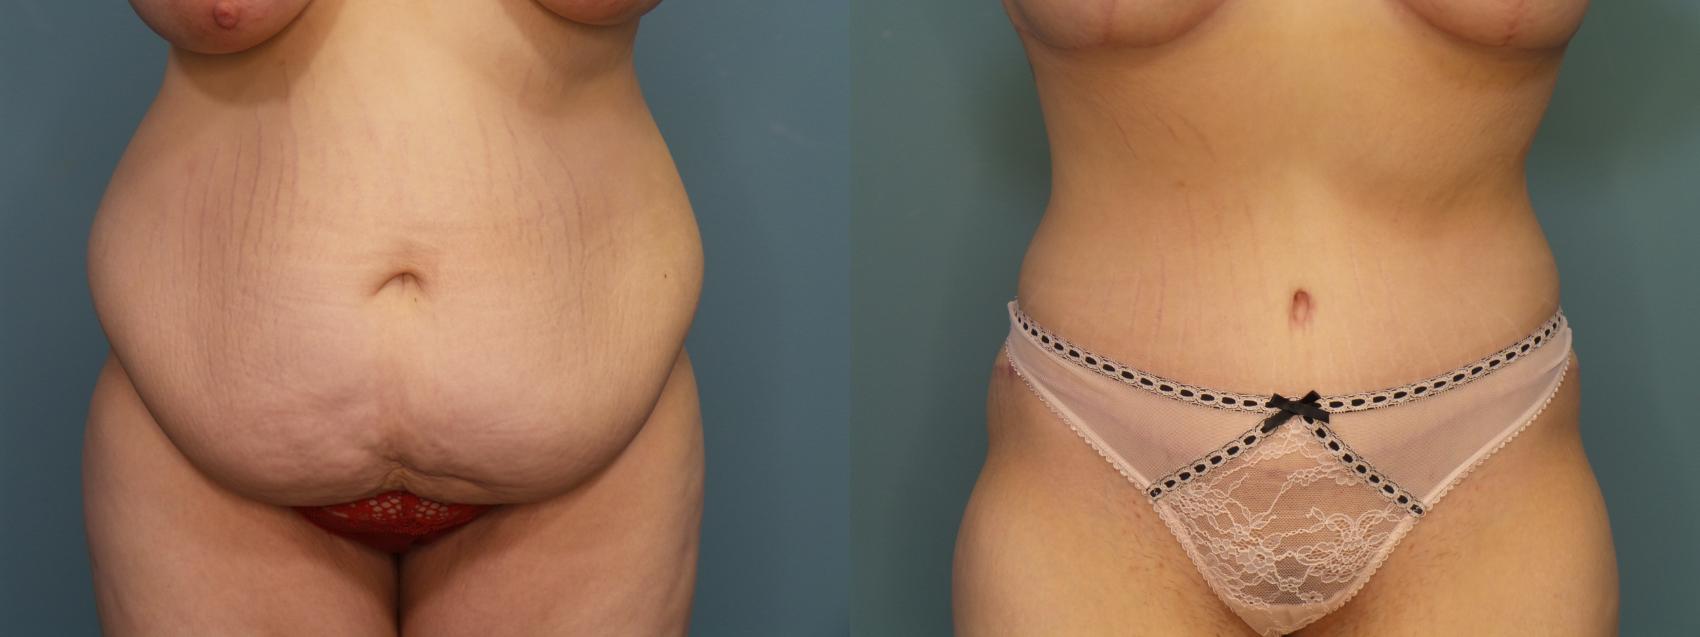 Before & After Tummy Tuck (Abdominoplasty) Case 304 Front View in Portland, OR